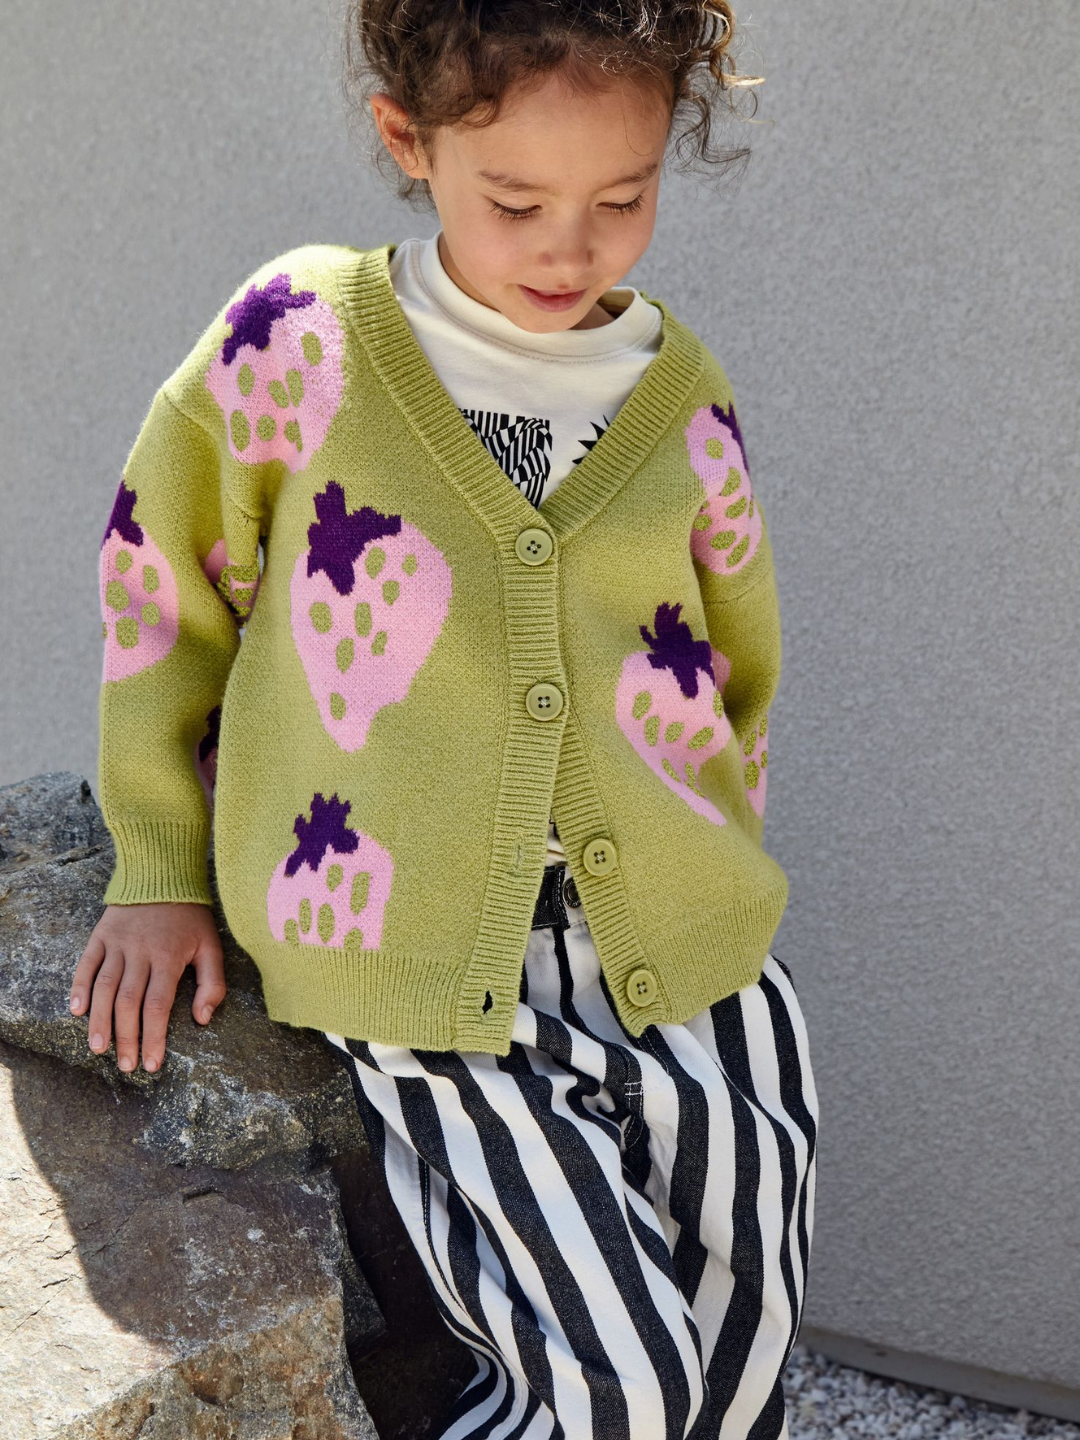 A child wearing a kids v-neck cardigan in pistachio green with an all-over pattern of large pink strawberries with a purple leaf. Cardigan has 4 buttons.She wears it with a white graphic tee, black and white striped jeans, and is seated on a rock against a grey wall.